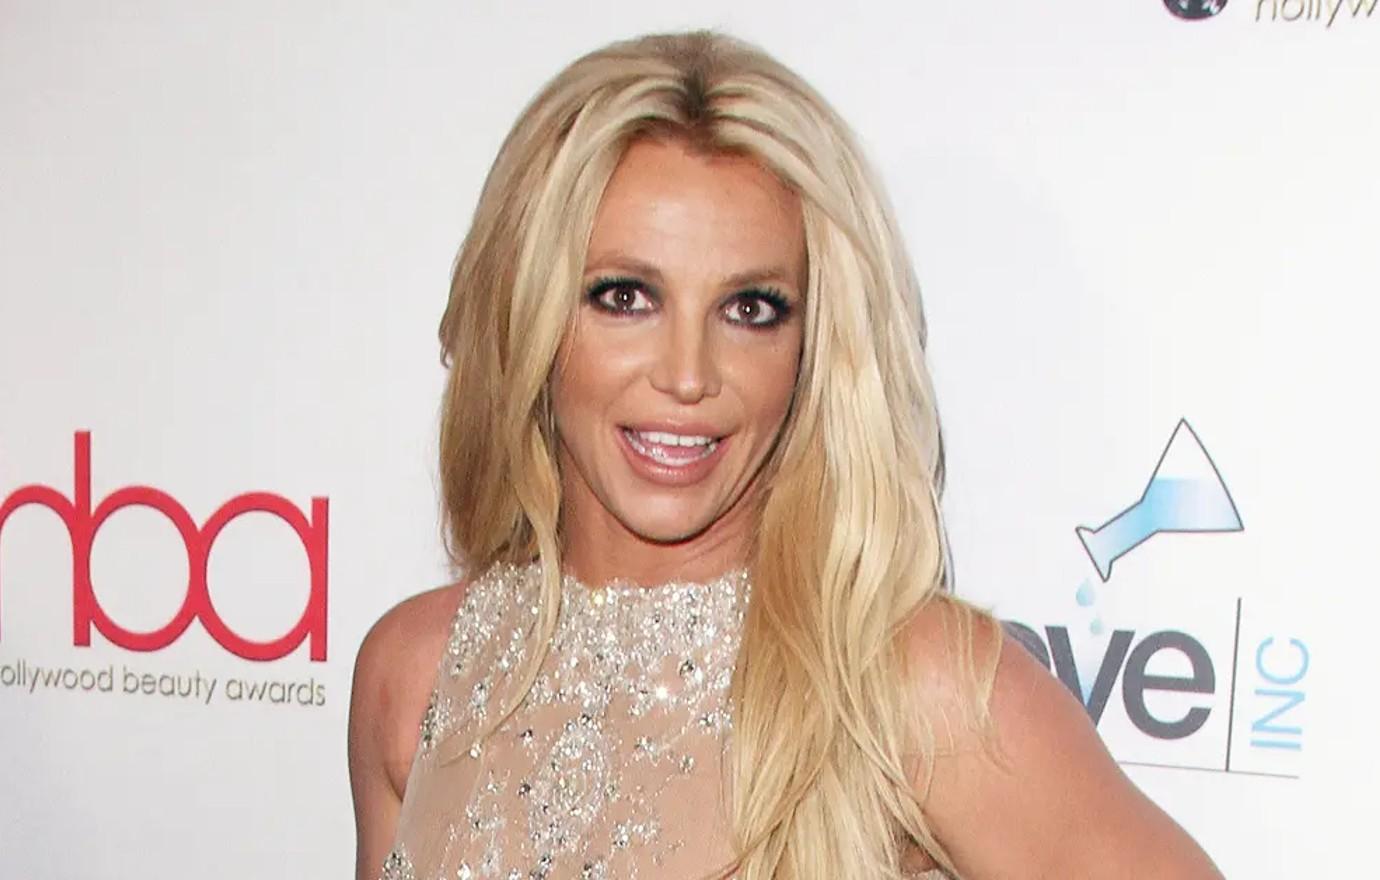 Britney Spears 'Not Accepting' Help From Her Family Amid Divorce Drama